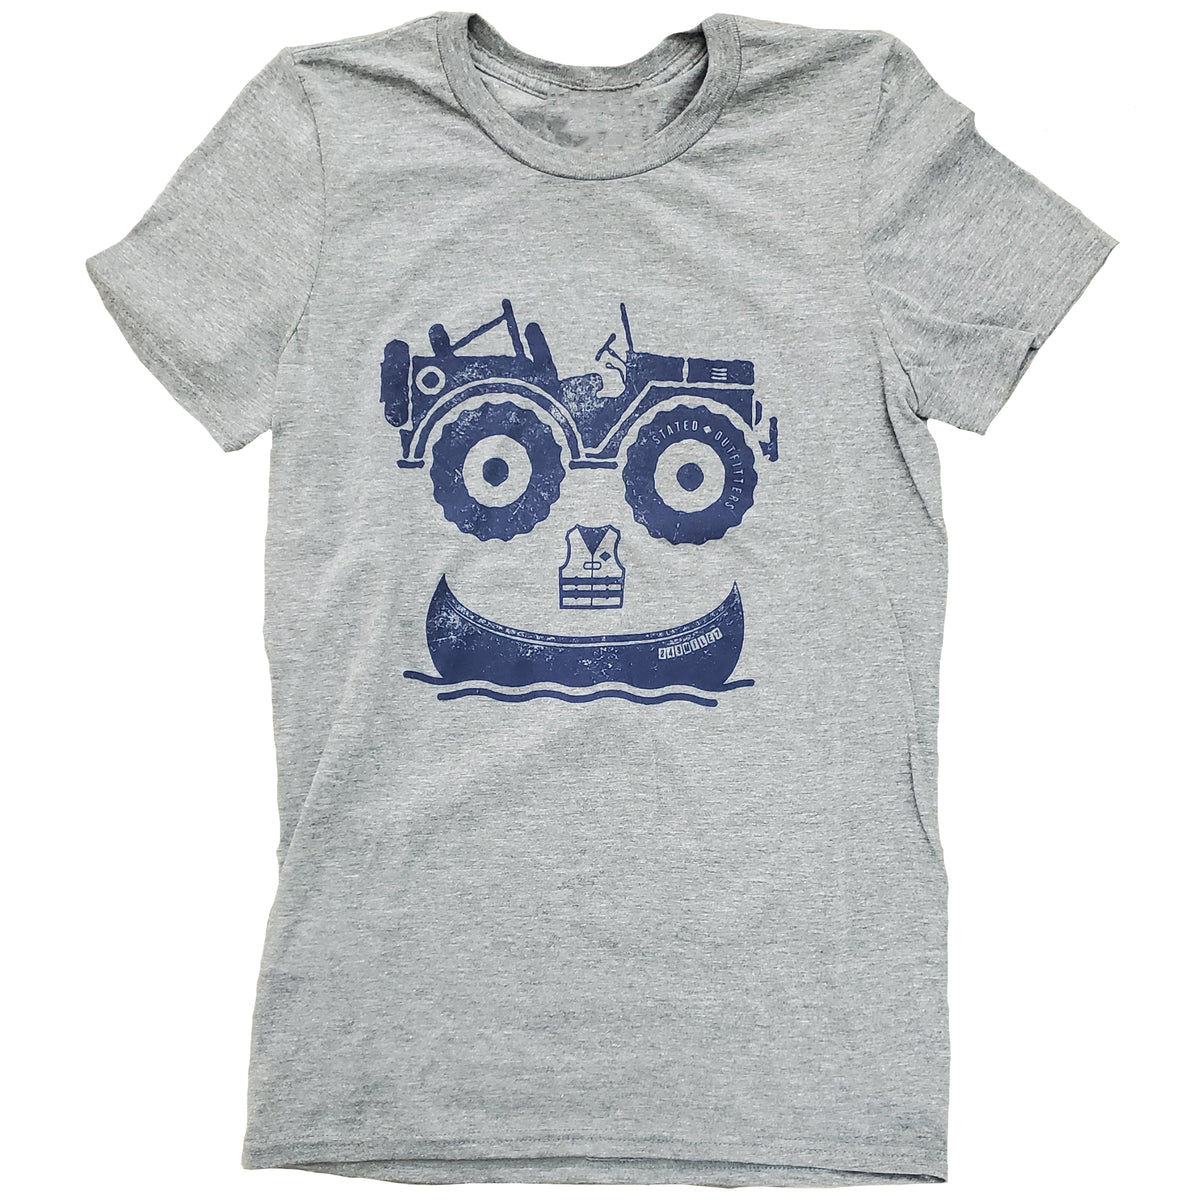 Stated Outfitters Jeep Smile Tee